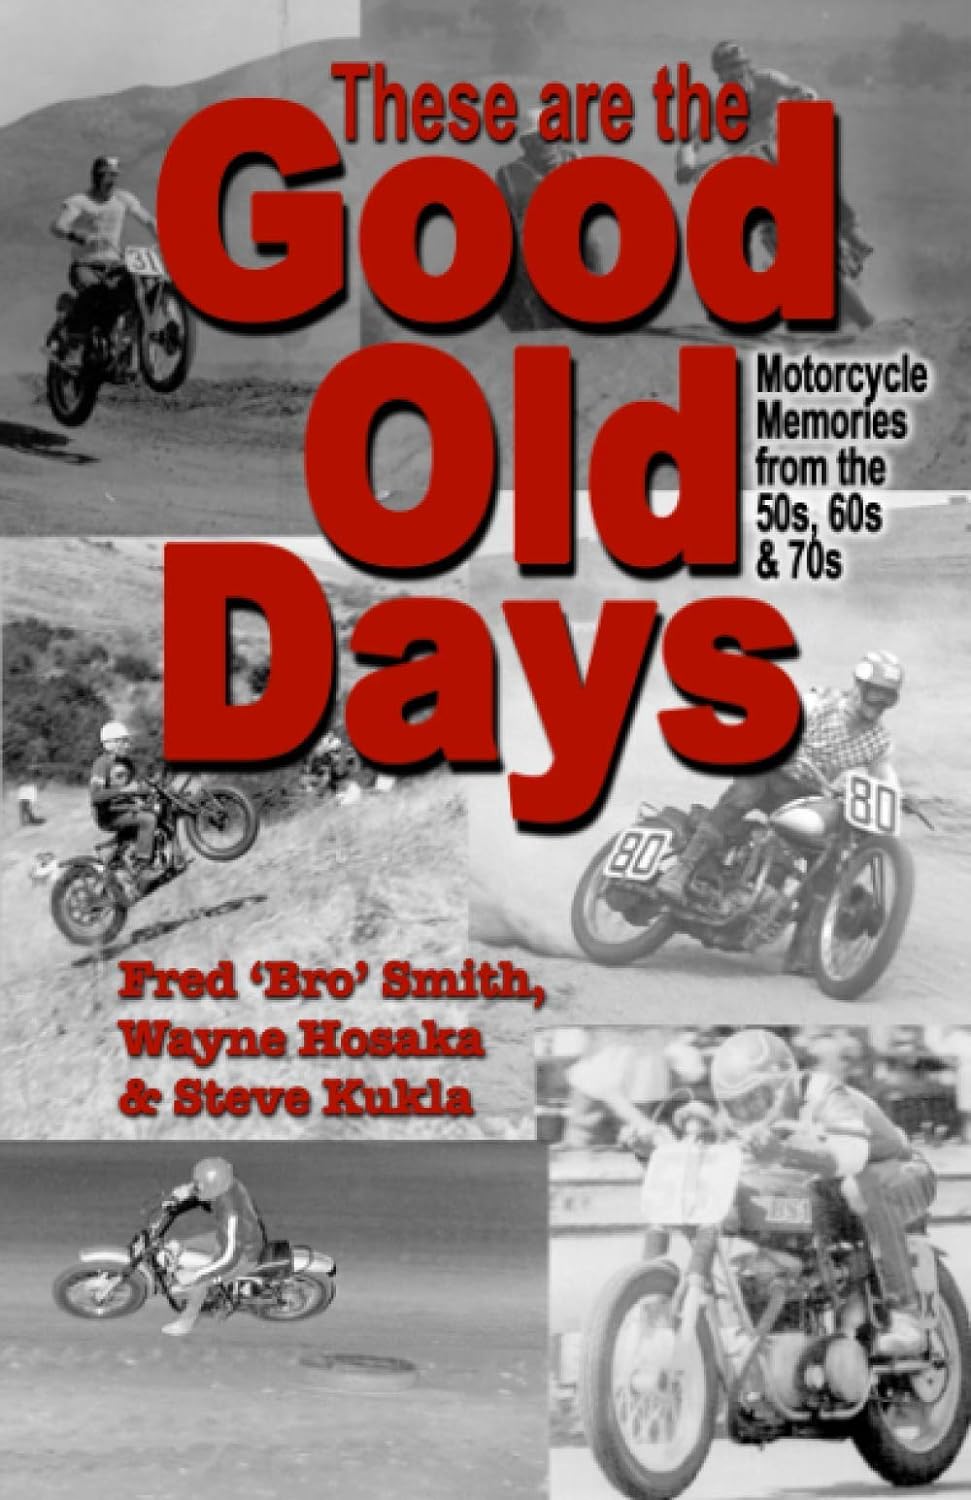 These are the Good Old Days: Motorcycle Memories of the 50s, 60s & 70s 